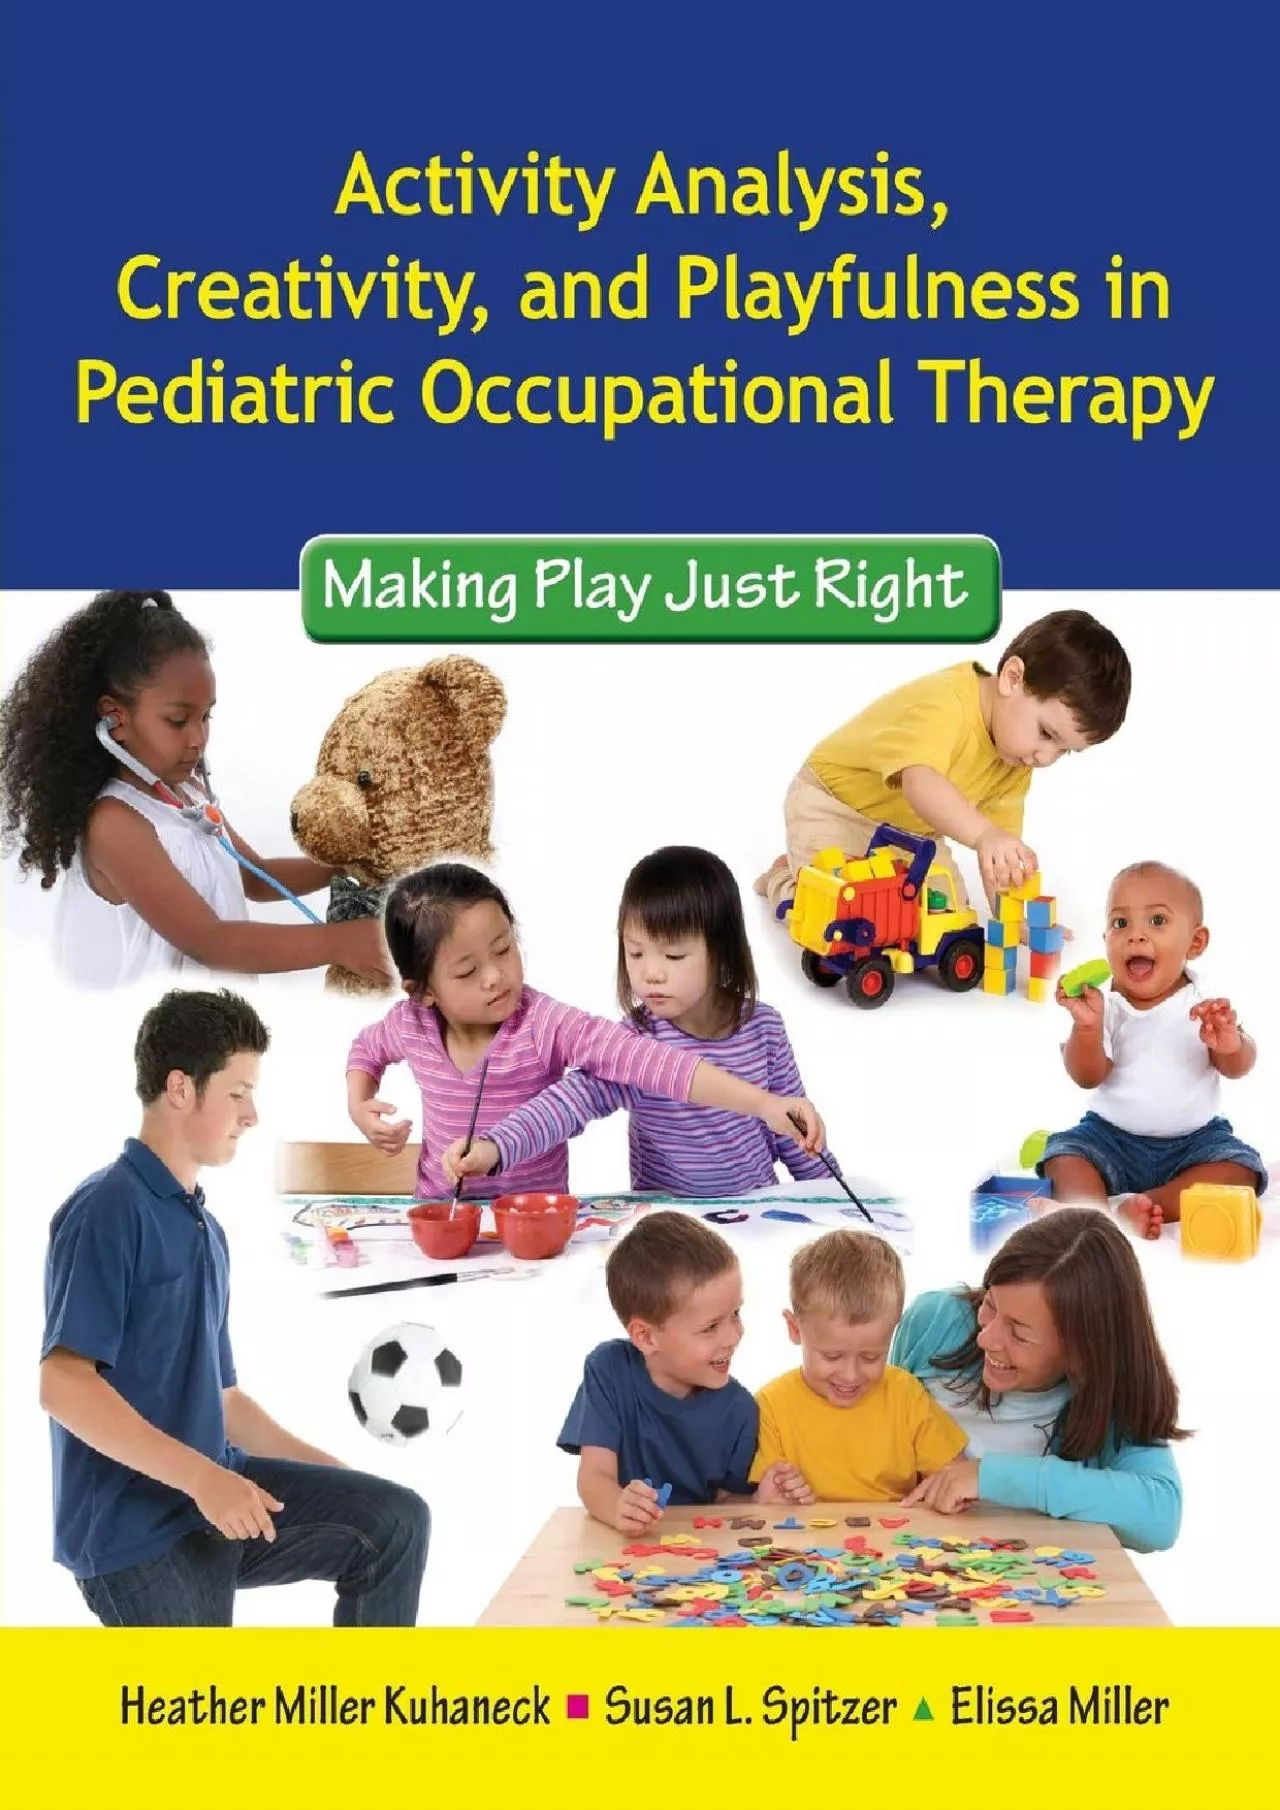 (BOOS)-Activity Analysis, Creativity and Playfulness in Pediatric Occupational Therapy: